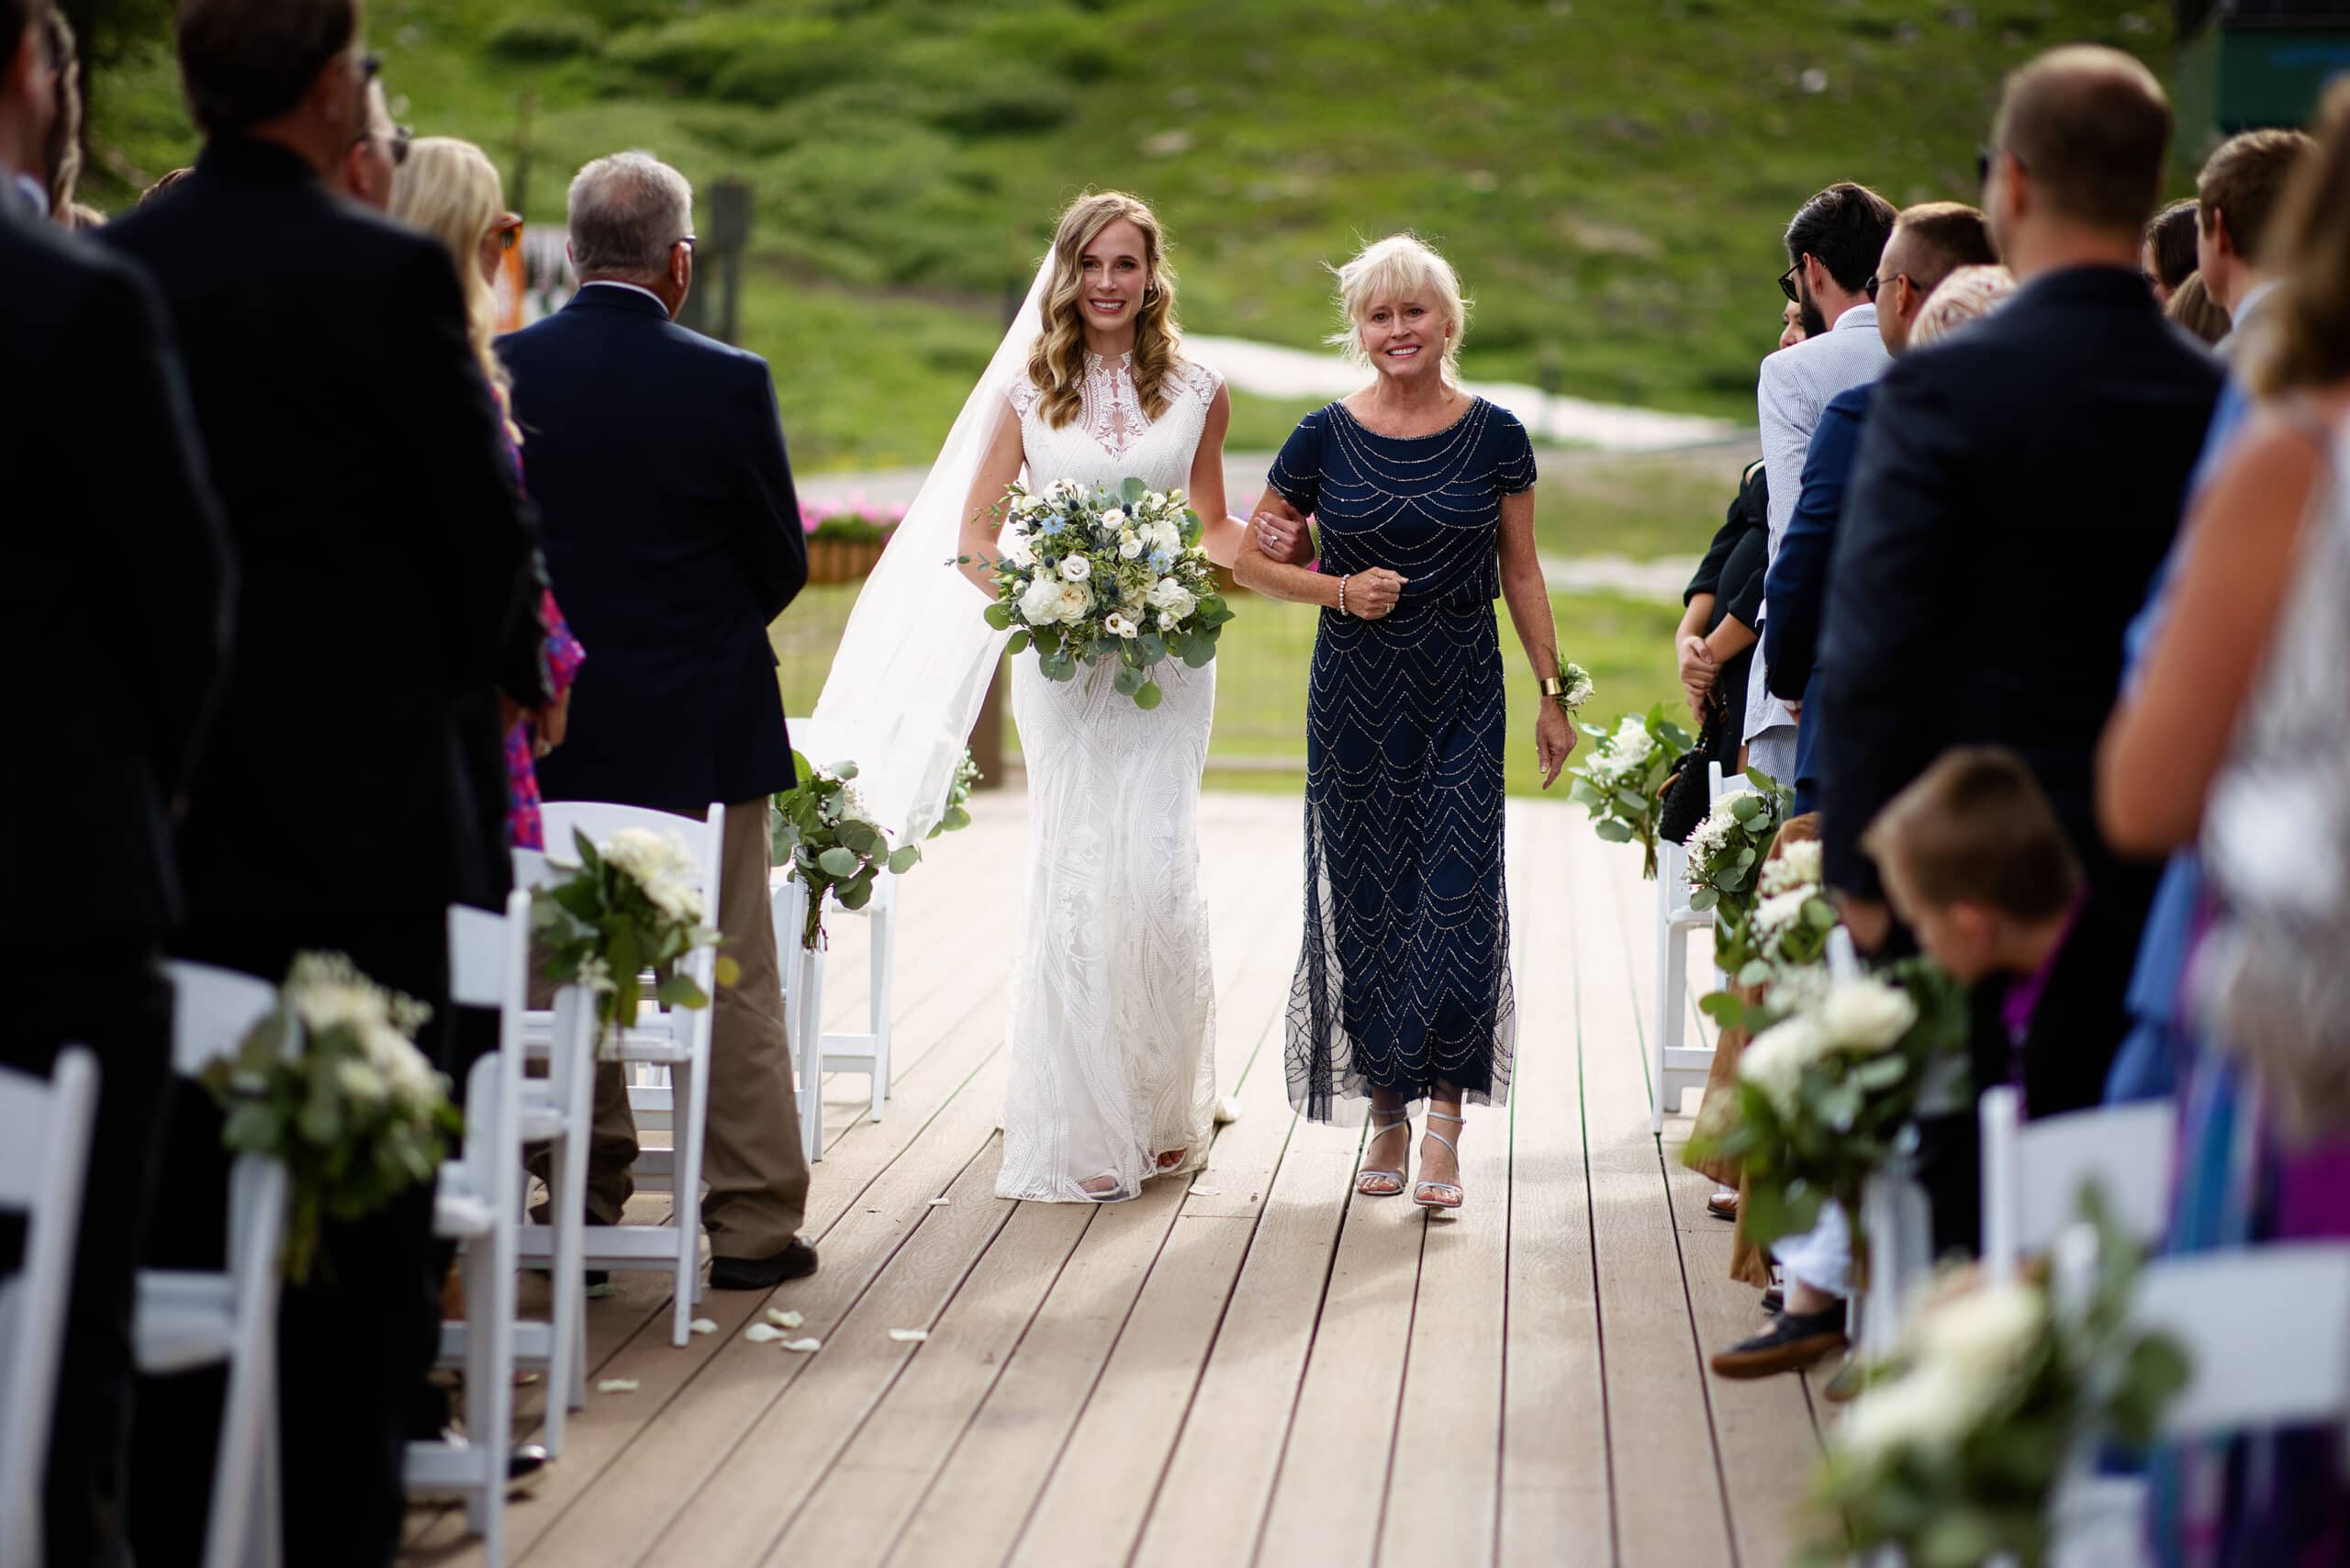 Keely walks down the aisle with her mother